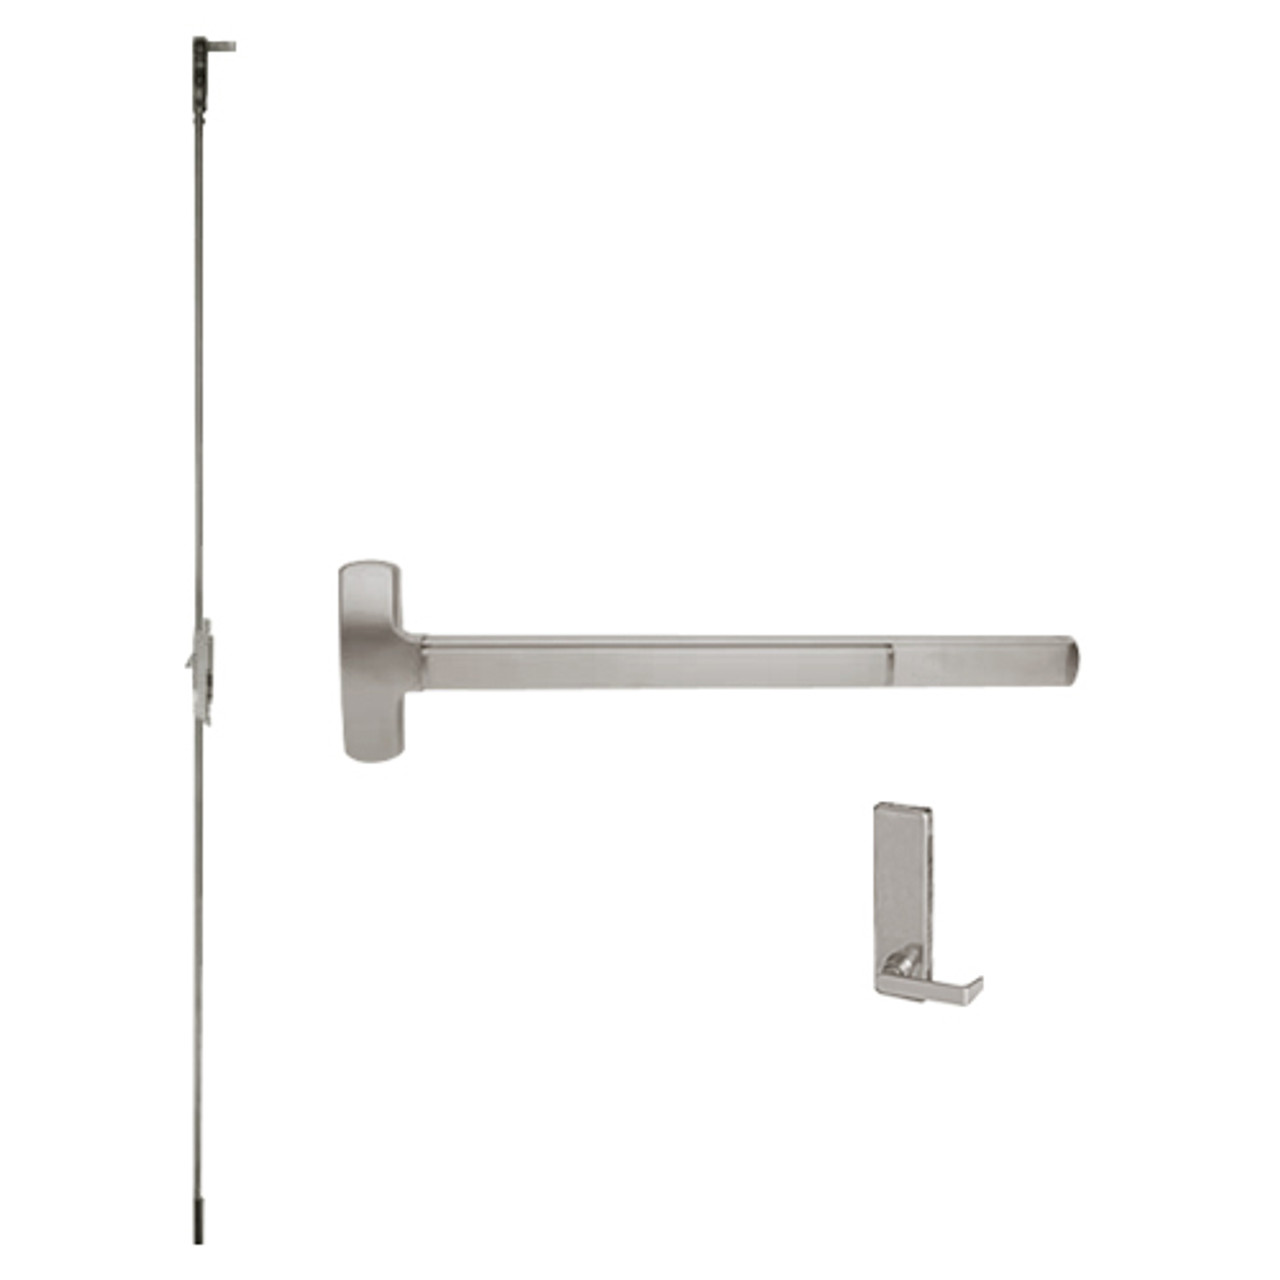 F-25-C-L-DT-DANE-US32D-3-RHR Falcon Exit Device in Satin Stainless Steel